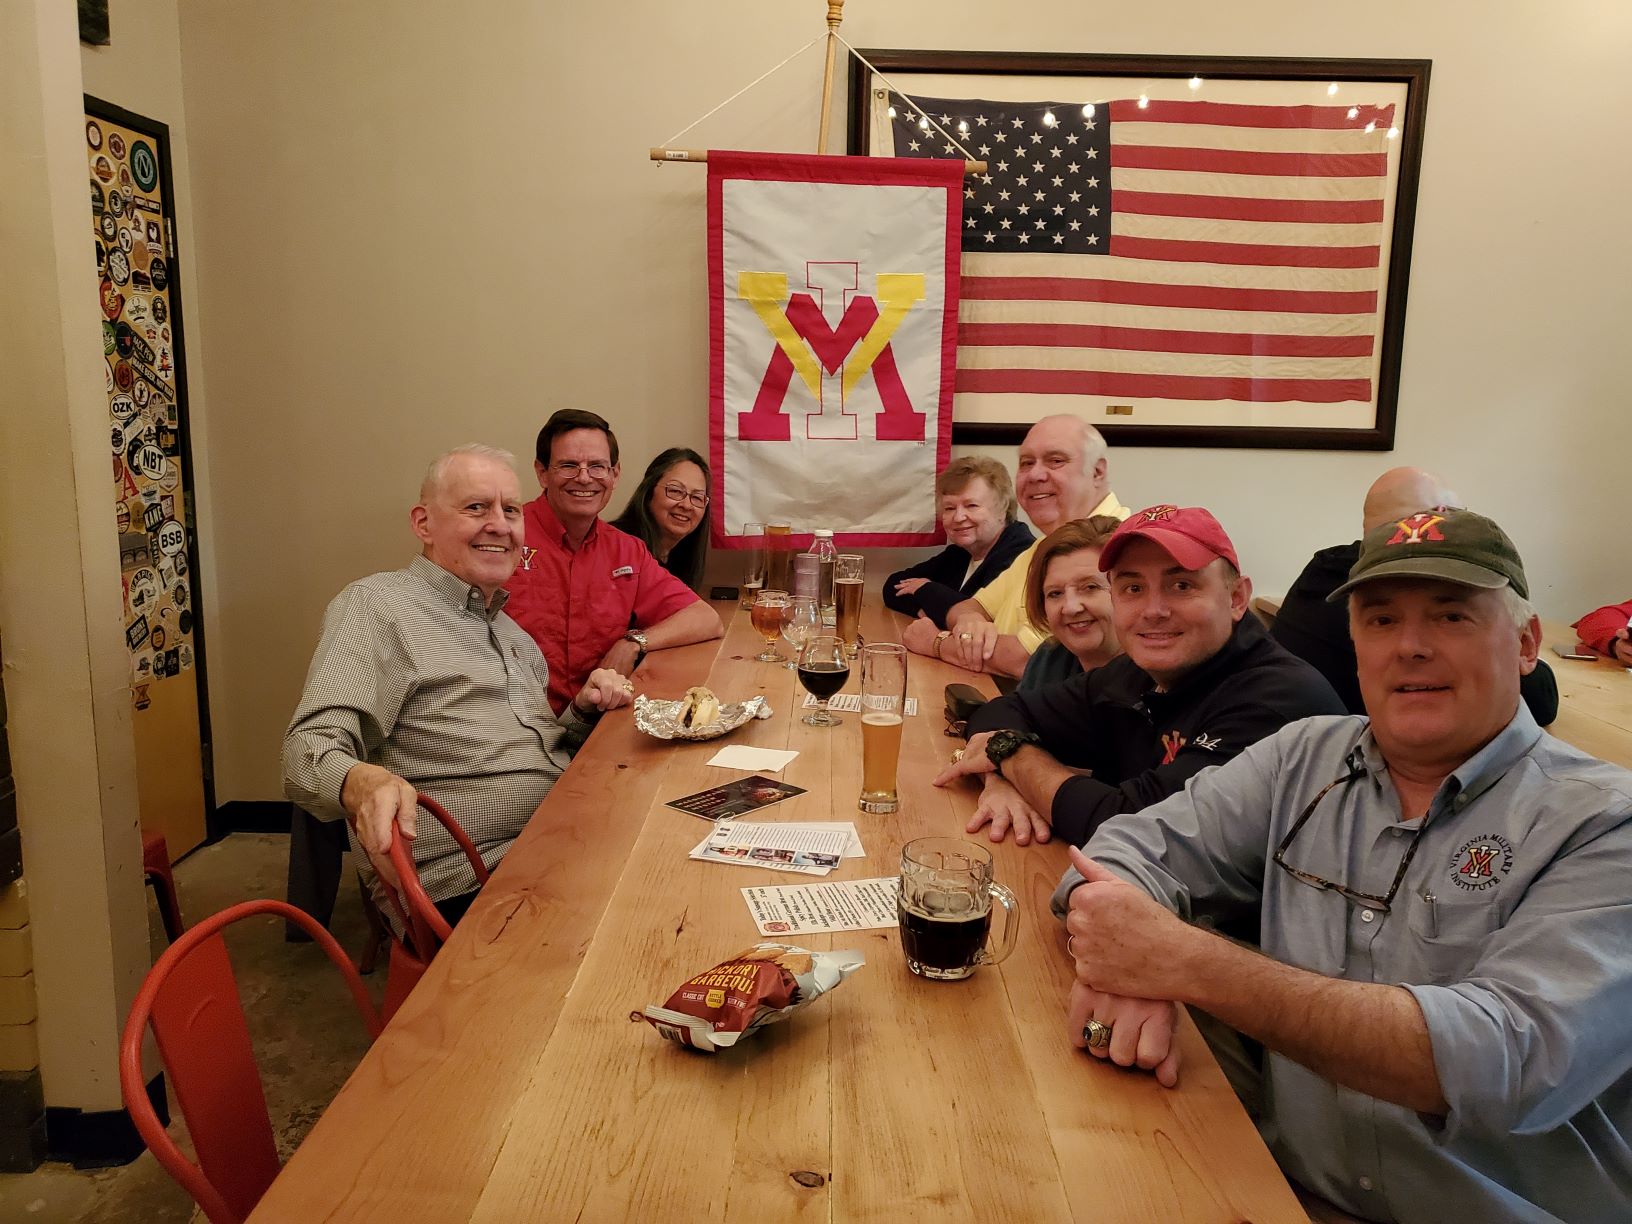 Group of people seated at dining table with VMI flag in the center.